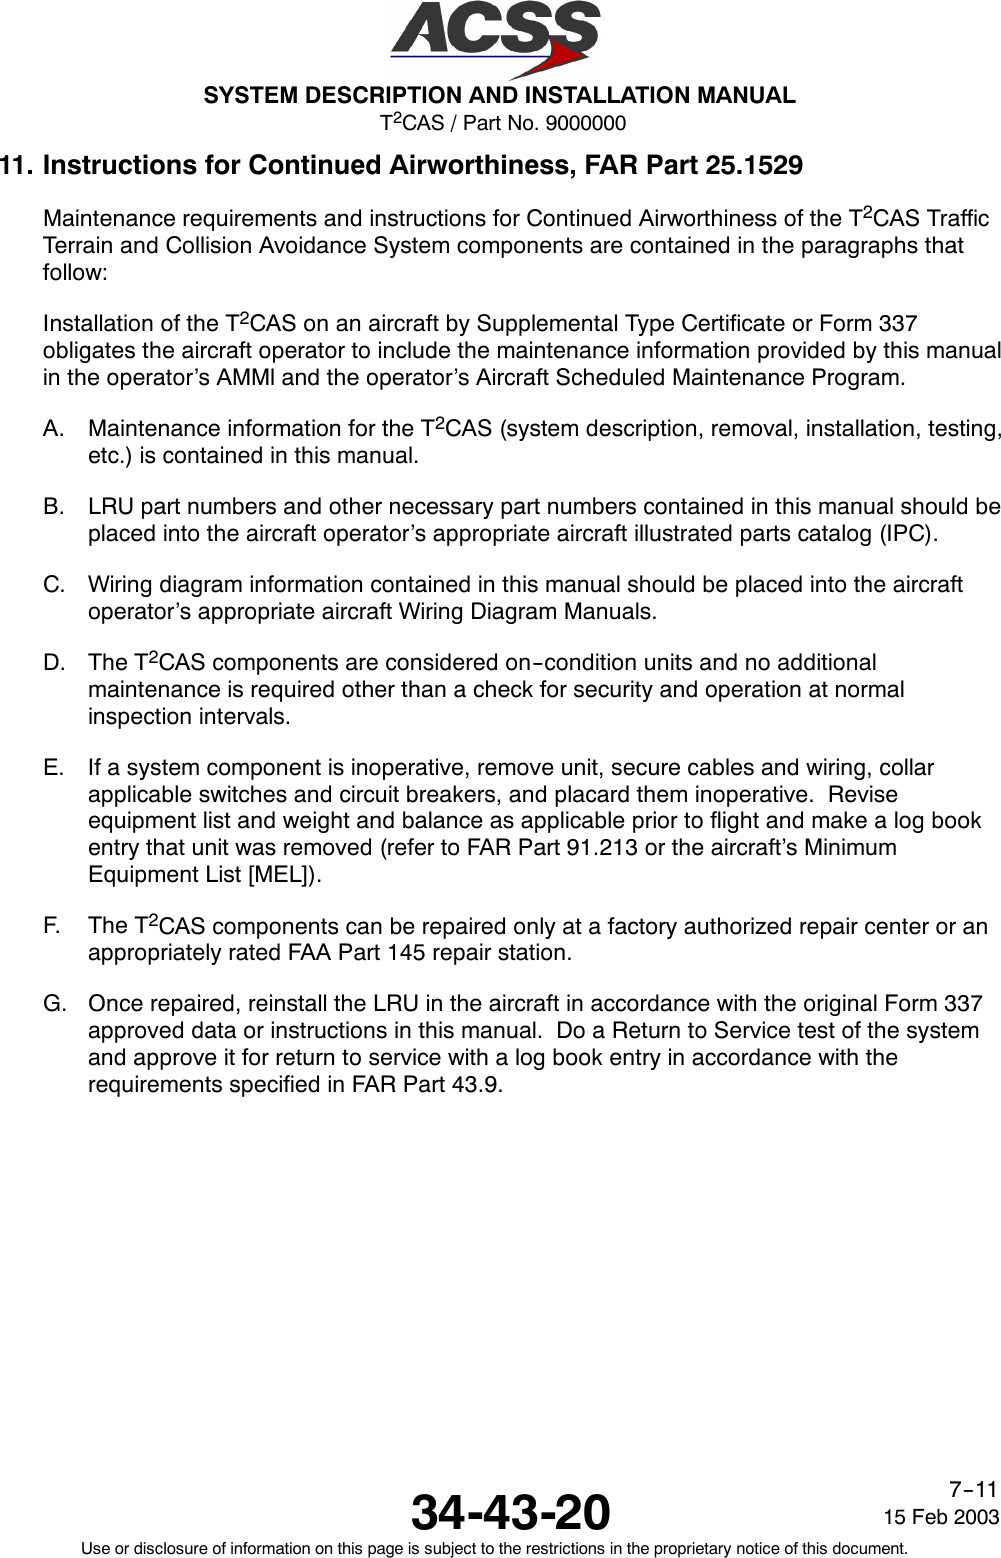 T2CAS / Part No. 9000000SYSTEM DESCRIPTION AND INSTALLATION MANUAL34-43-20 15 Feb 2003Use or disclosure of information on this page is subject to the restrictions in the proprietary notice of this document.7--1111. Instructions for Continued Airworthiness, FAR Part 25.1529Maintenance requirements and instructions for Continued Airworthiness of the T2CAS TrafficTerrain and Collision Avoidance System components are contained in the paragraphs thatfollow:Installation of the T2CAS on an aircraft by Supplemental Type Certificate or Form 337obligates the aircraft operator to include the maintenance information provided by this manualin the operator’s AMMl and the operator’s Aircraft Scheduled Maintenance Program.A. Maintenance information for the T2CAS (system description, removal, installation, testing,etc.) is contained in this manual.B. LRU part numbers and other necessary part numbers contained in this manual should beplaced into the aircraft operator’s appropriate aircraft illustrated parts catalog (IPC).C. Wiring diagram information contained in this manual should be placed into the aircraftoperator’s appropriate aircraft Wiring Diagram Manuals.D. The T2CAS components are considered on--condition units and no additionalmaintenance is required other than a check for security and operation at normalinspection intervals.E. If a system component is inoperative, remove unit, secure cables and wiring, collarapplicable switches and circuit breakers, and placard them inoperative. Reviseequipment list and weight and balance as applicable prior to flight and make a log bookentry that unit was removed (refer to FAR Part 91.213 or the aircraft’s MinimumEquipment List [MEL]).F. The T2CAS components can be repaired only at a factory authorized repair center or anappropriately rated FAA Part 145 repair station.G. Once repaired, reinstall the LRU in the aircraft in accordance with the original Form 337approved data or instructions in this manual. Do a Return to Service test of the systemand approve it for return to service with a log book entry in accordance with therequirements specified in FAR Part 43.9.